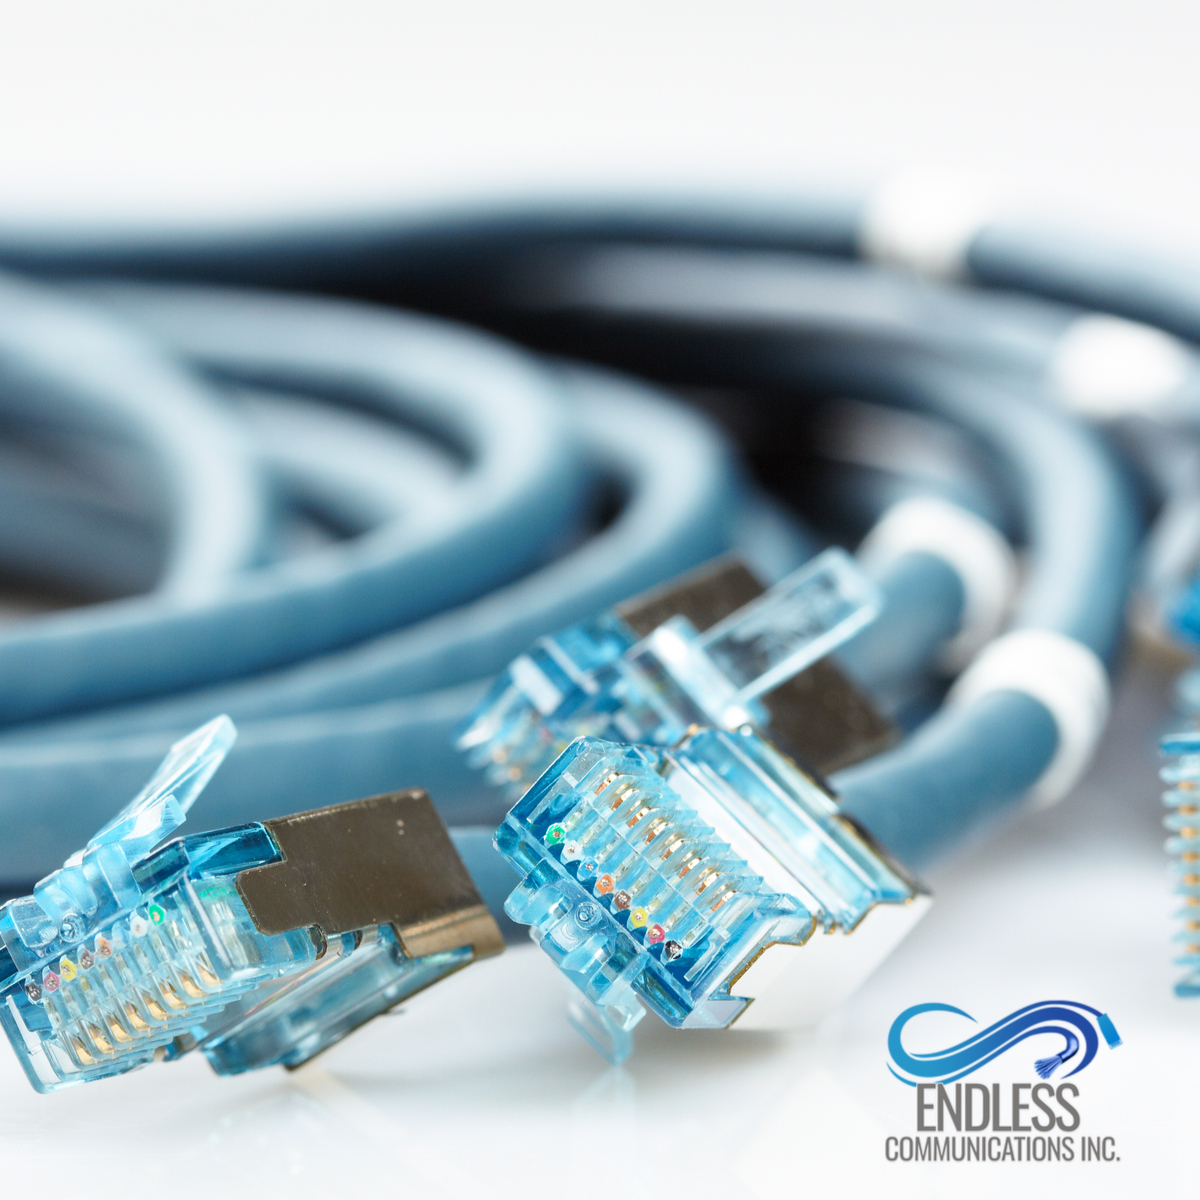 Where Does Cat 6 Cabling Fit into Your Networking Plans for Your Business?